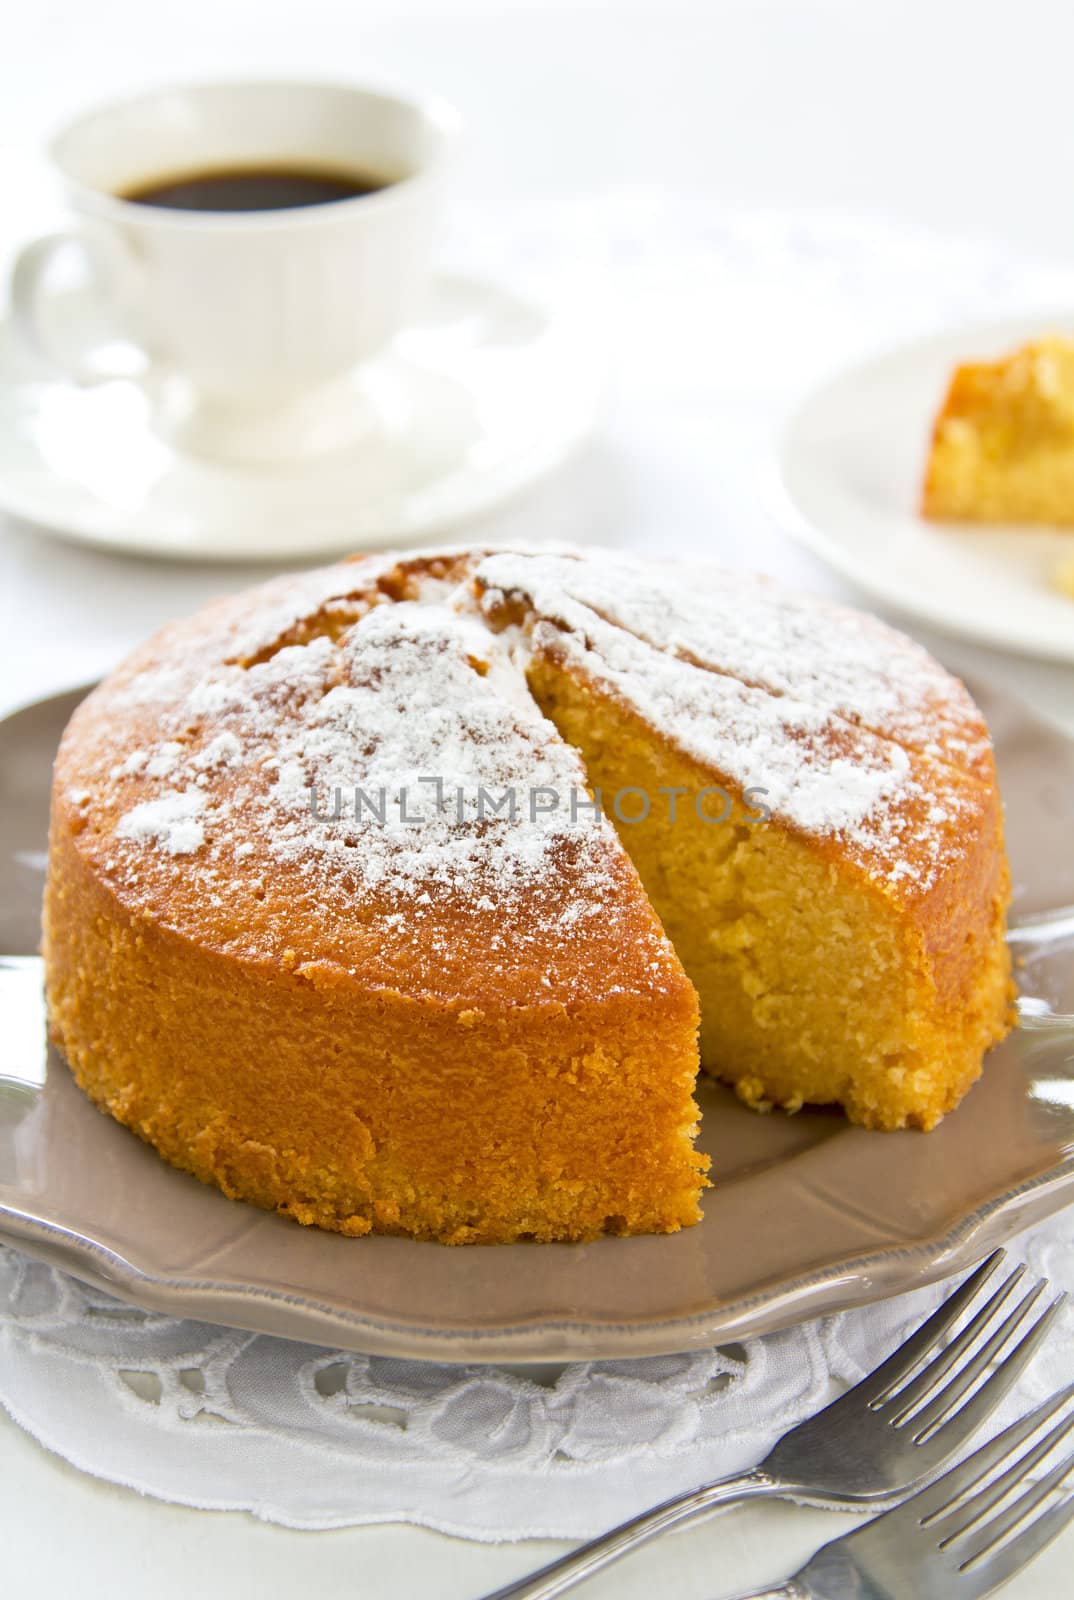 Butter cake with orange zest and juice by coffee